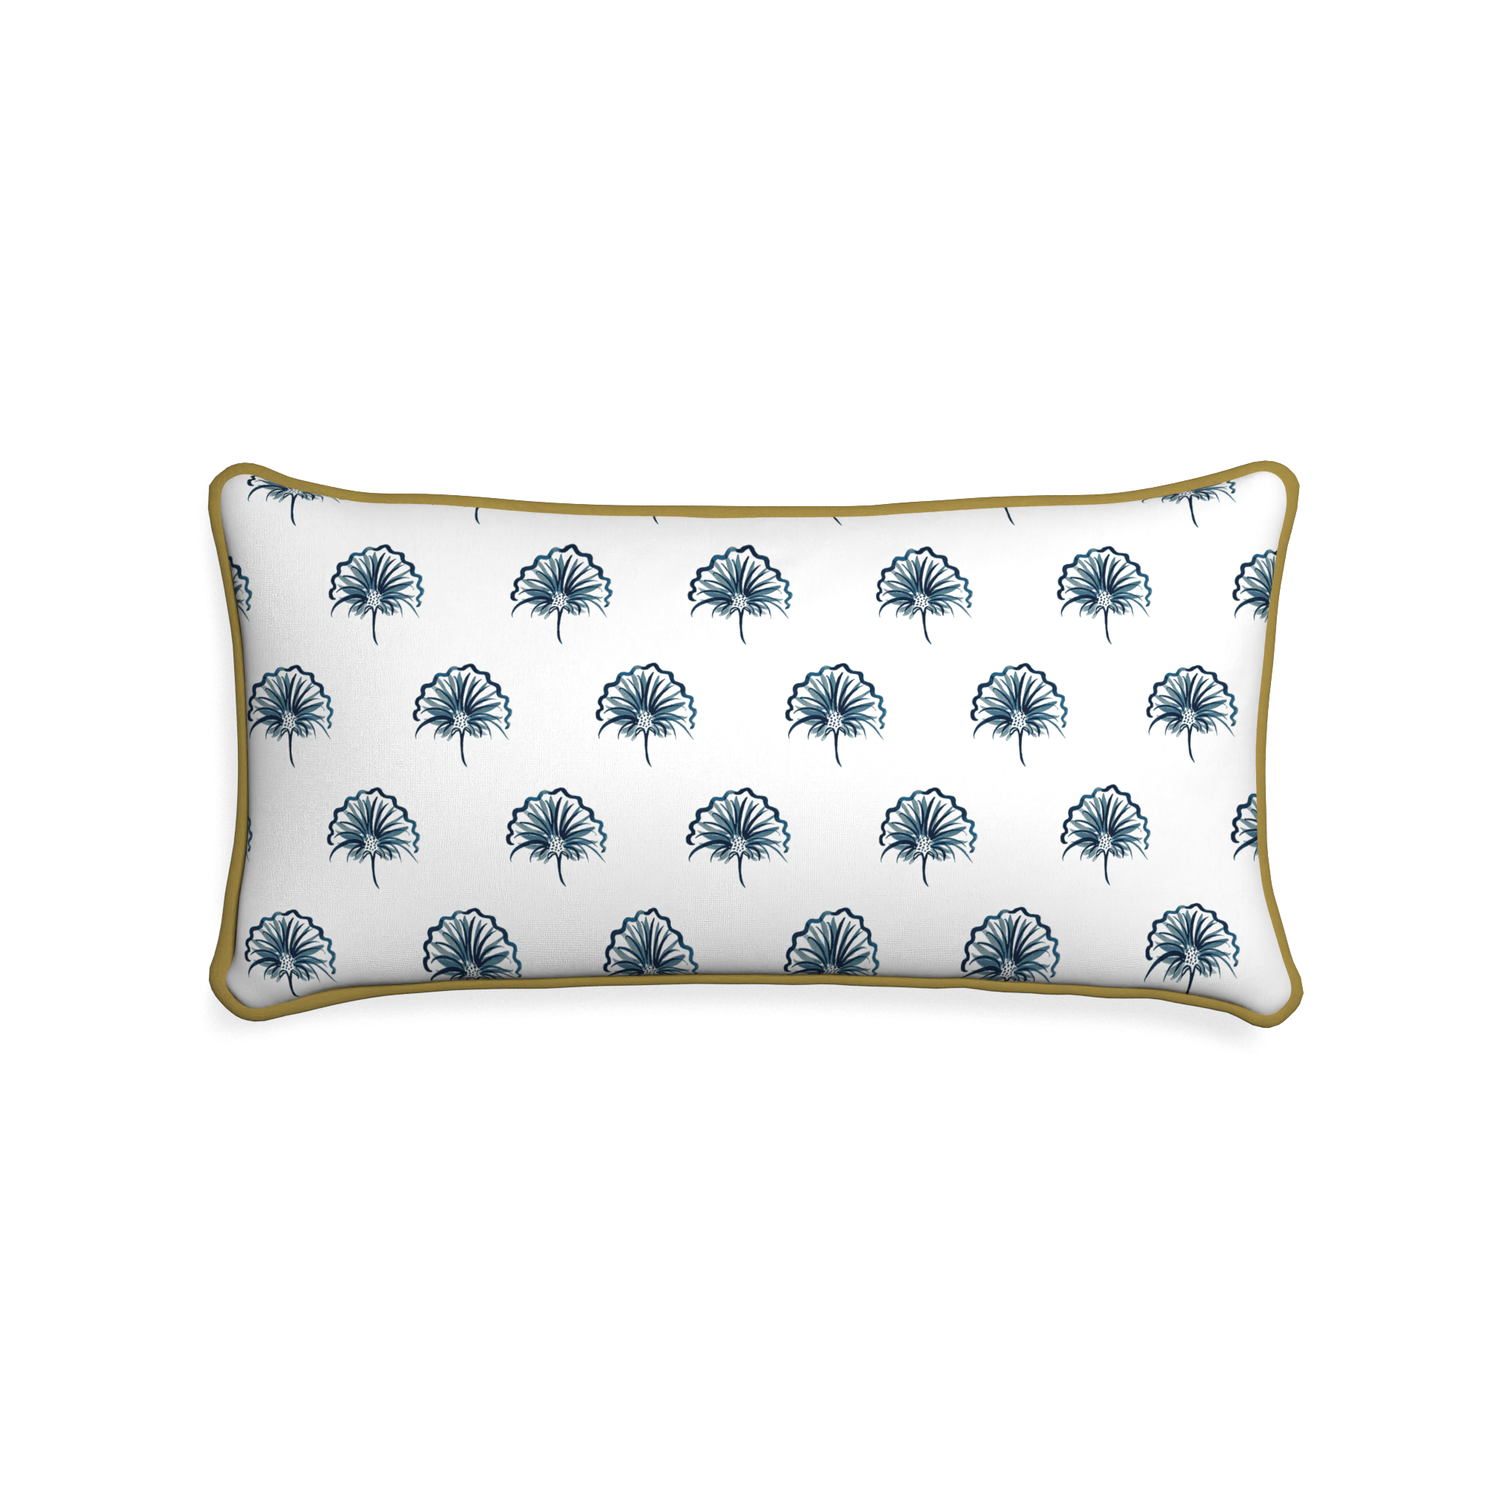 Midi-lumbar penelope midnight custom floral navypillow with c piping on white background